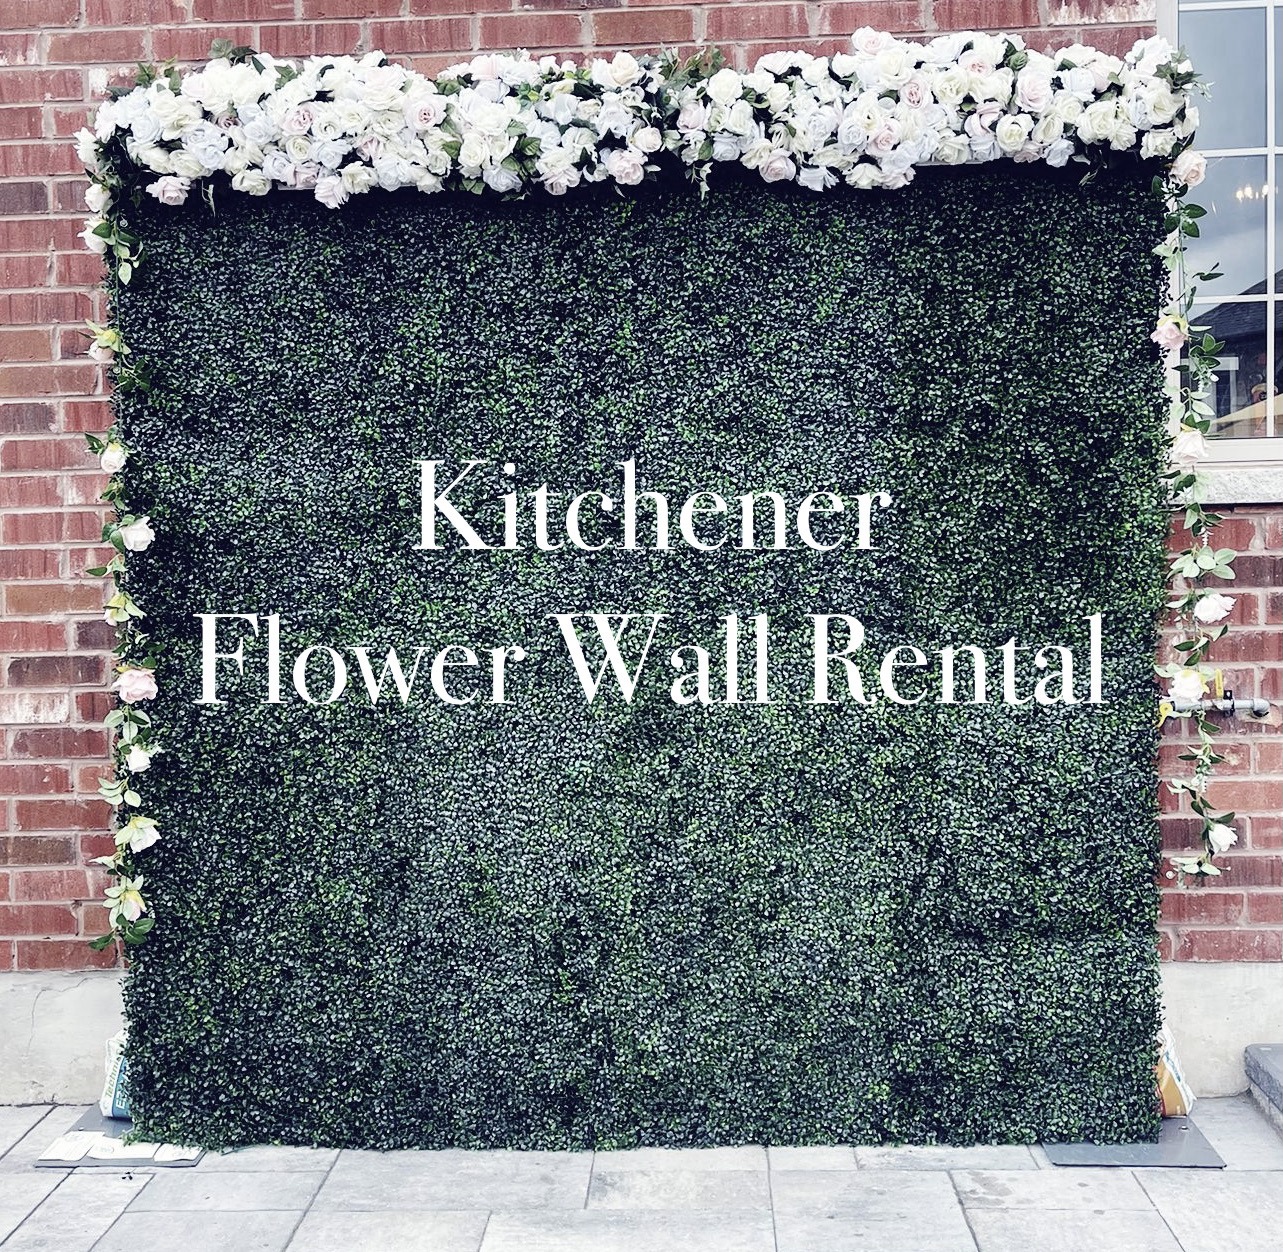 flower wall rental company in Kitchener